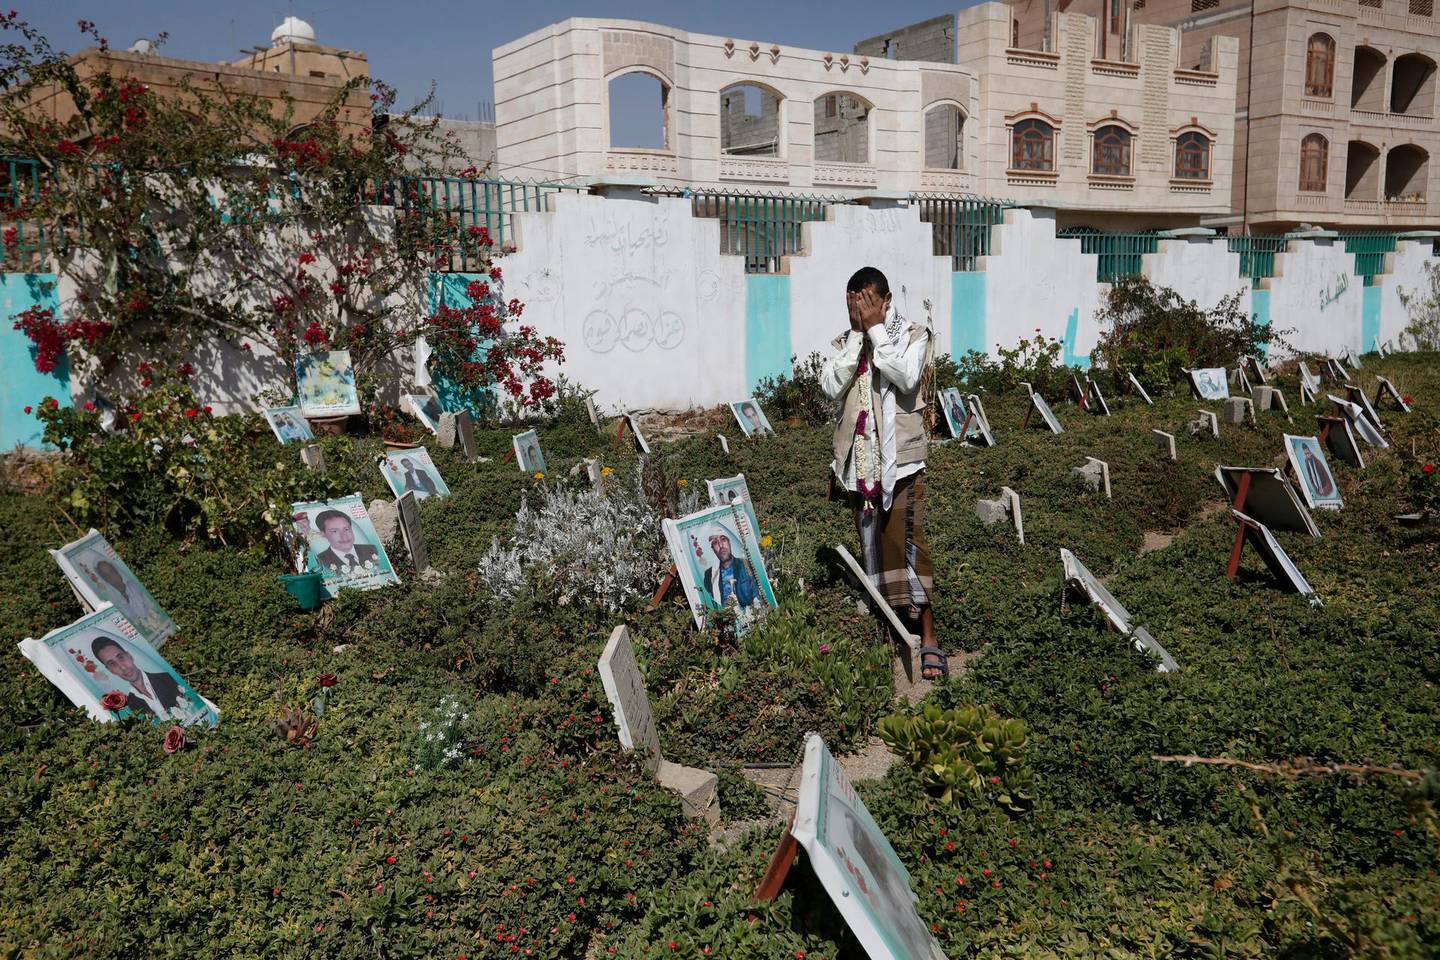 epa09048800 Recently released-Houthi prisoner Abdullah Al-Muntasir prays at the graves of his slain comrades who were killed in ongoing fighting, at a cemetery in Sana'a, Yemen, 03 March 2021. Abdullah Al-Muntasir was recently released as part of a local mediator-brokered prisoner swap deal with the Saudi-backed government forces in the oil-rich province of Marib which has been in the grip of an escalating fighting between both warring sides.  EPA/YAHYA ARHAB